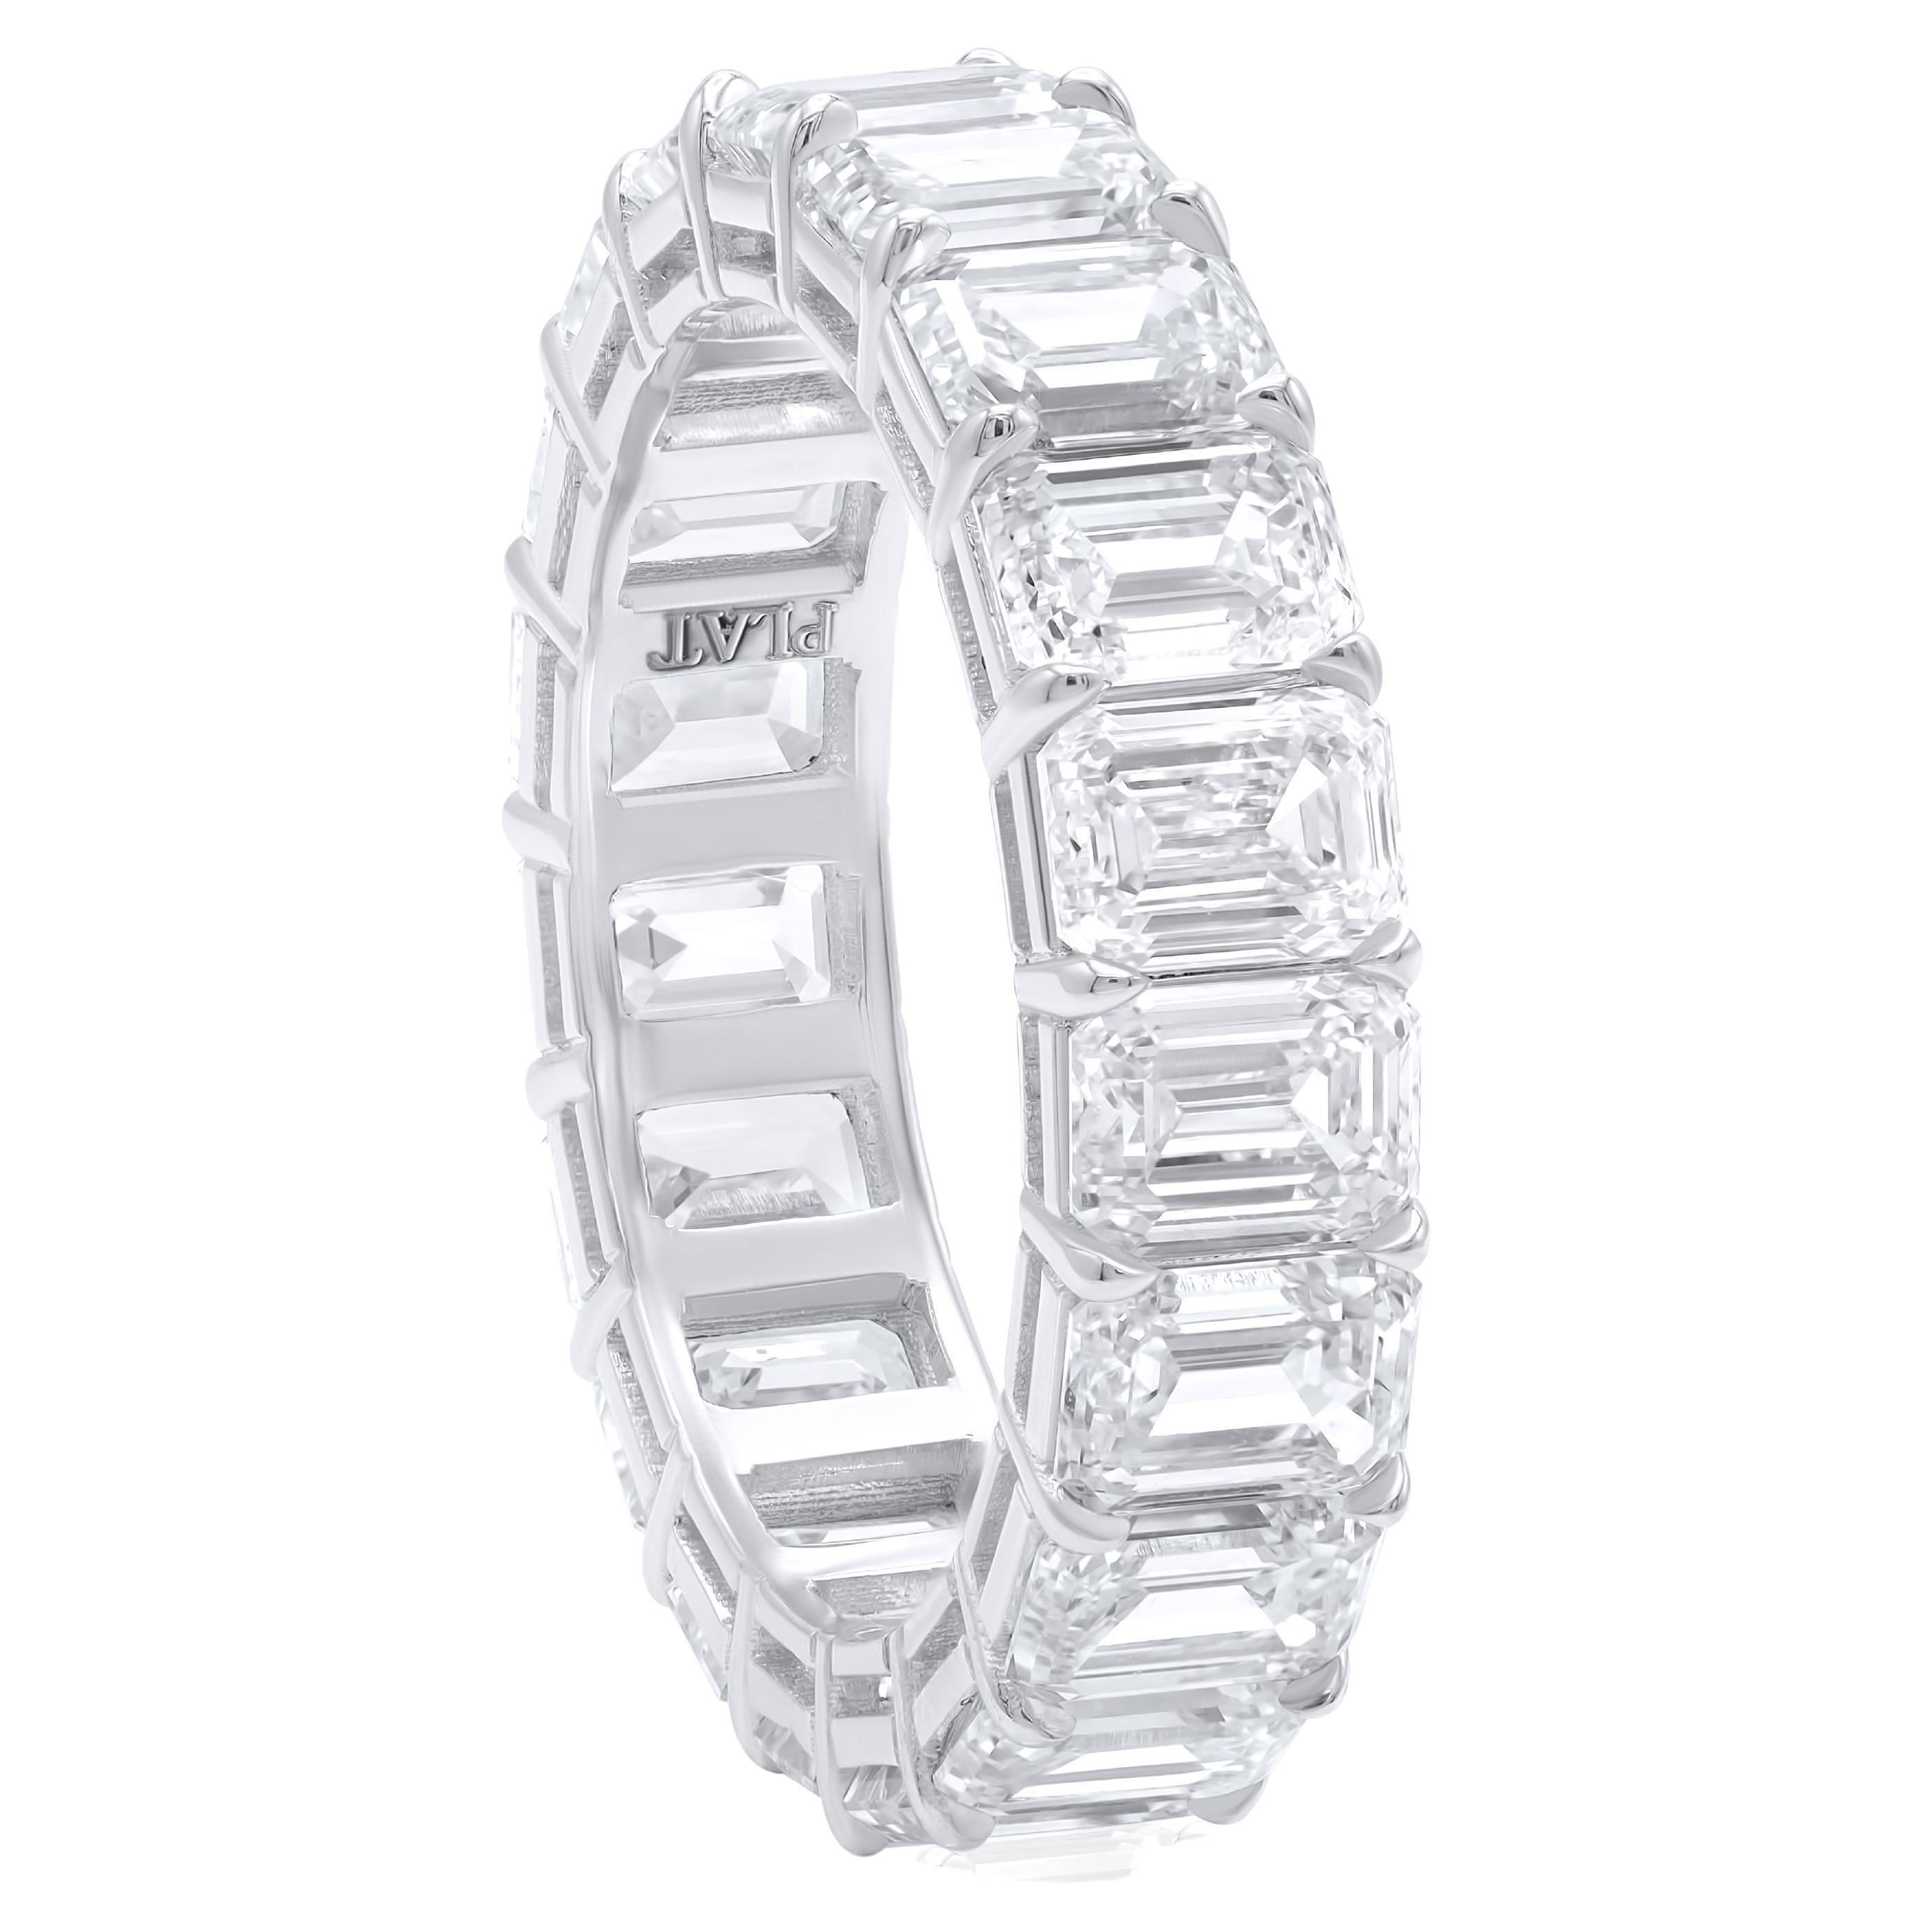 Diana M. 18KT WHITE GOLD WEDDING BAND 5.00CTS EMERALD CUT DIAMONDS, 21STONE For Sale